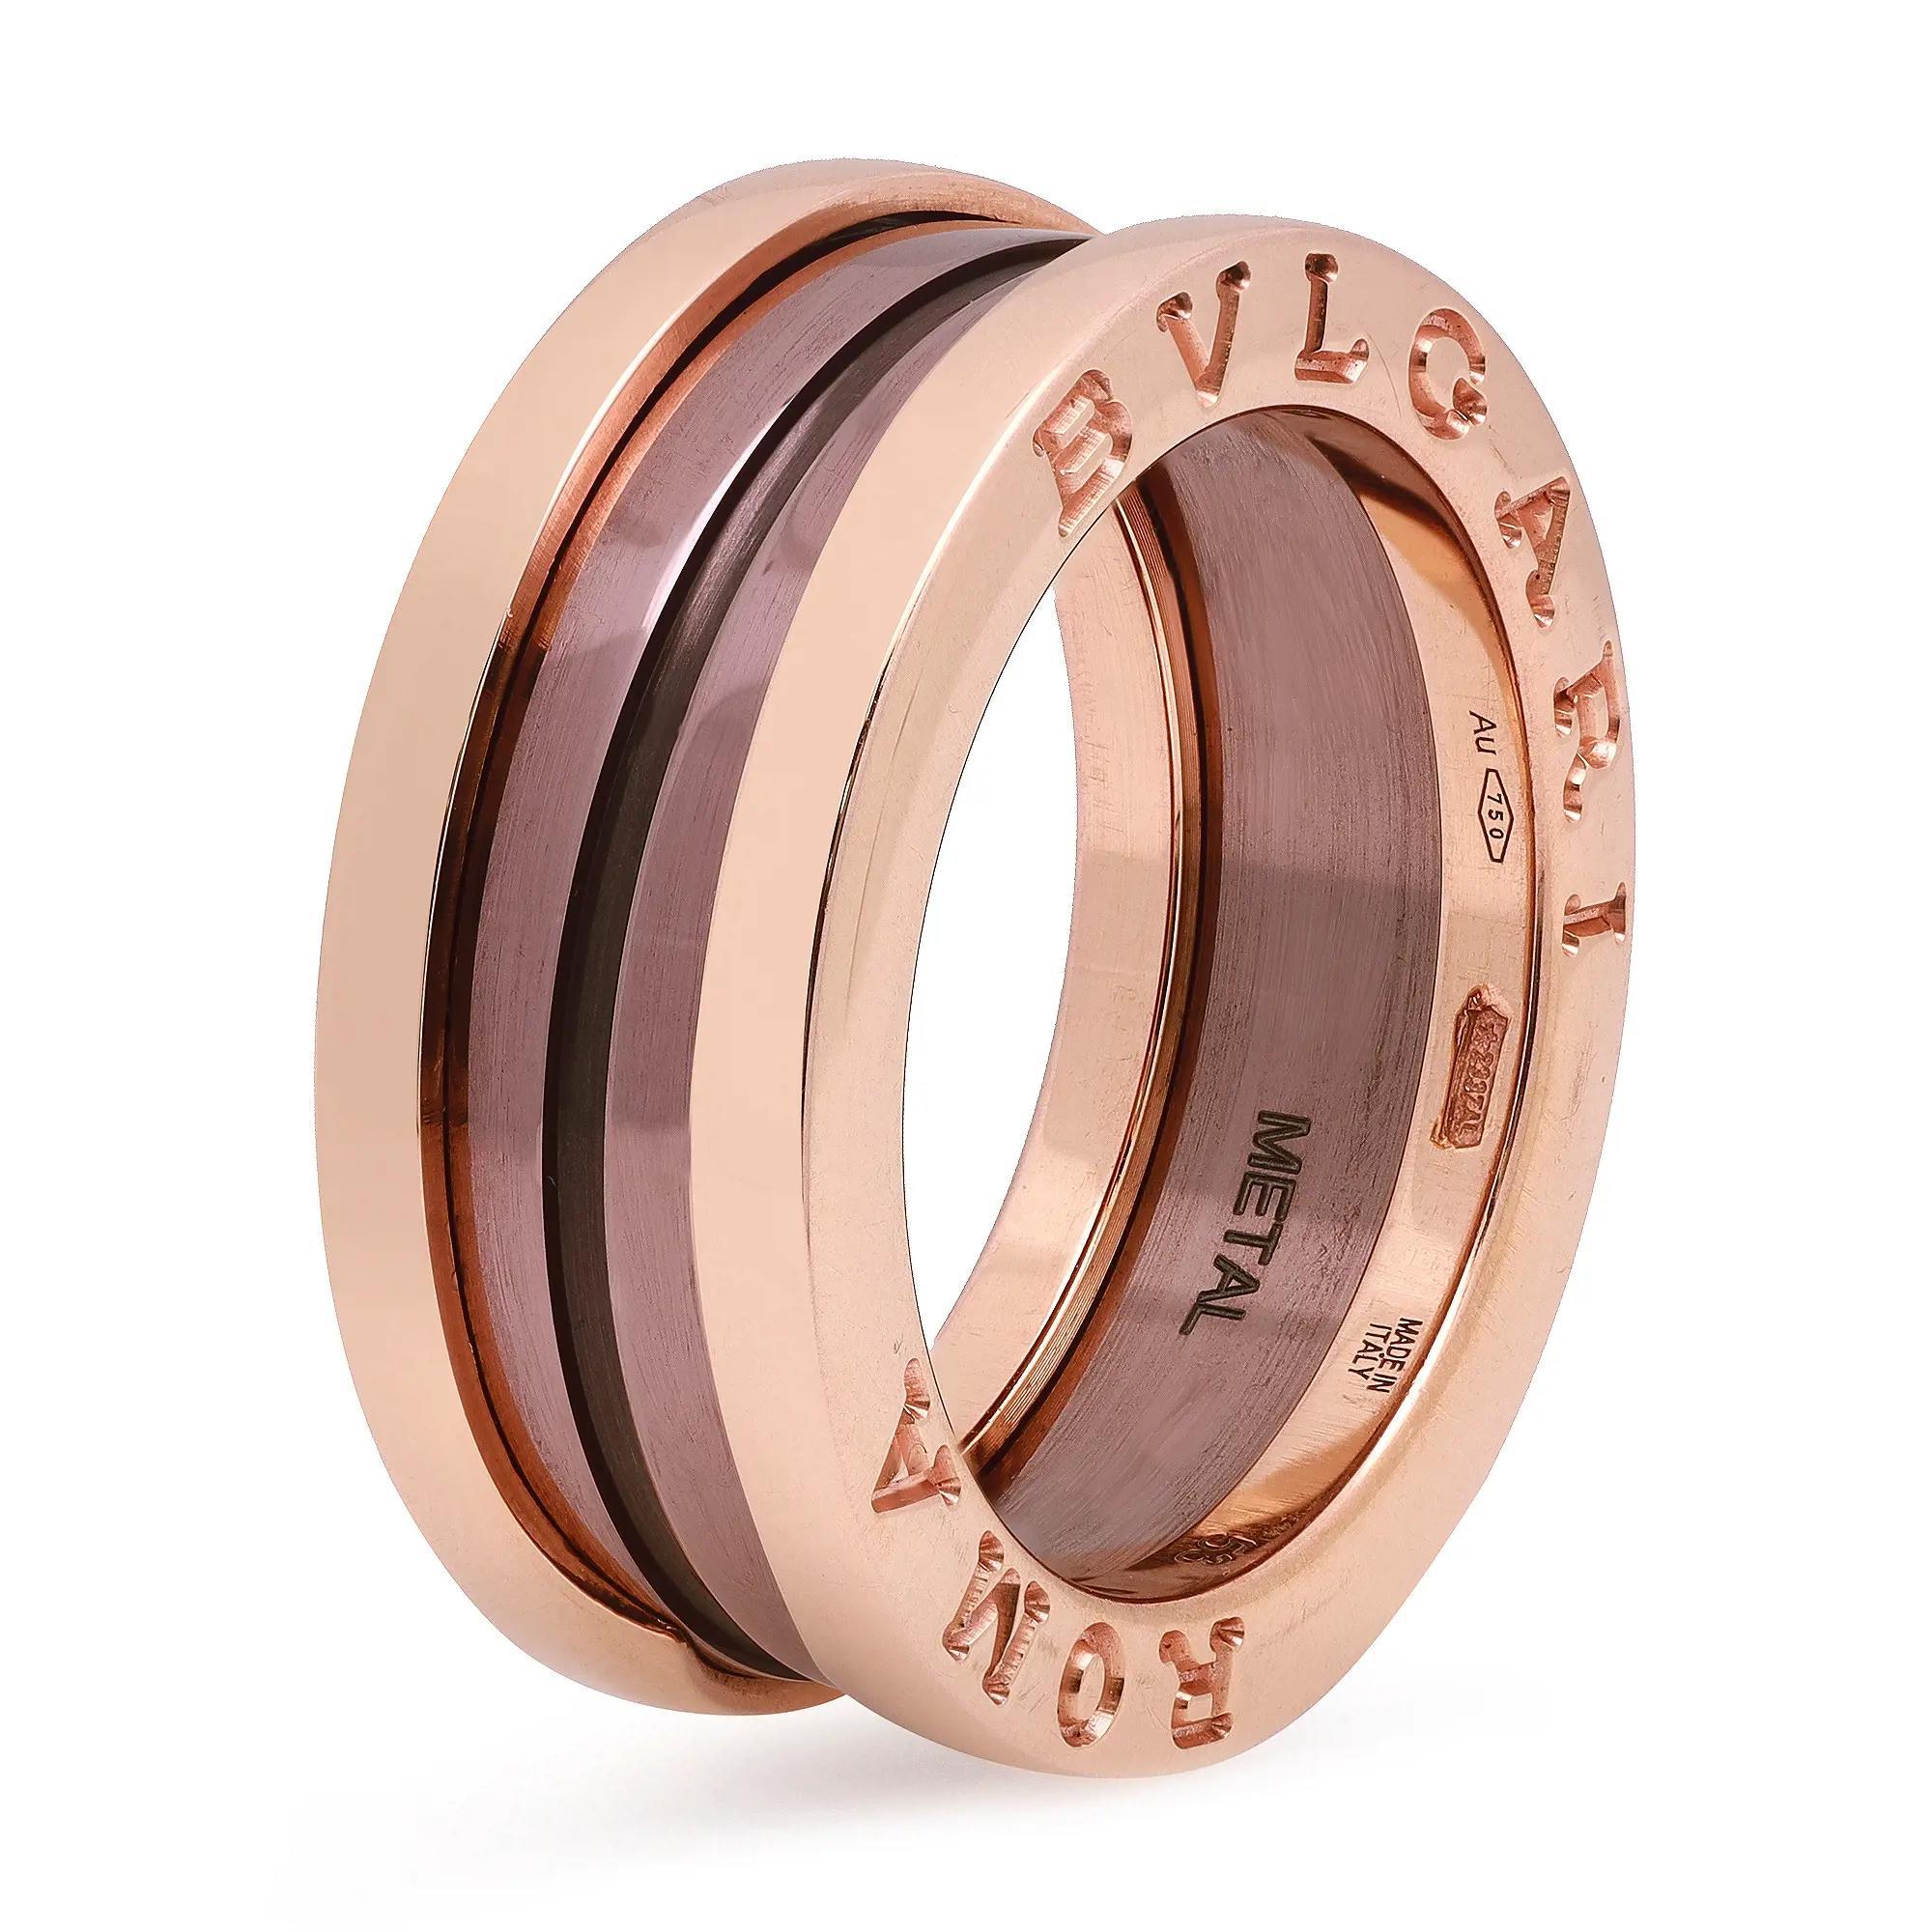 The B.Zero1 ring is a signature piece from the legendary jewelry design house Bvlgari. Crafted in fine 18K rose gold and ceramic. It features a clean modern design with two internal ceramic spiral bands surrounded by two rose gold rims engraved with